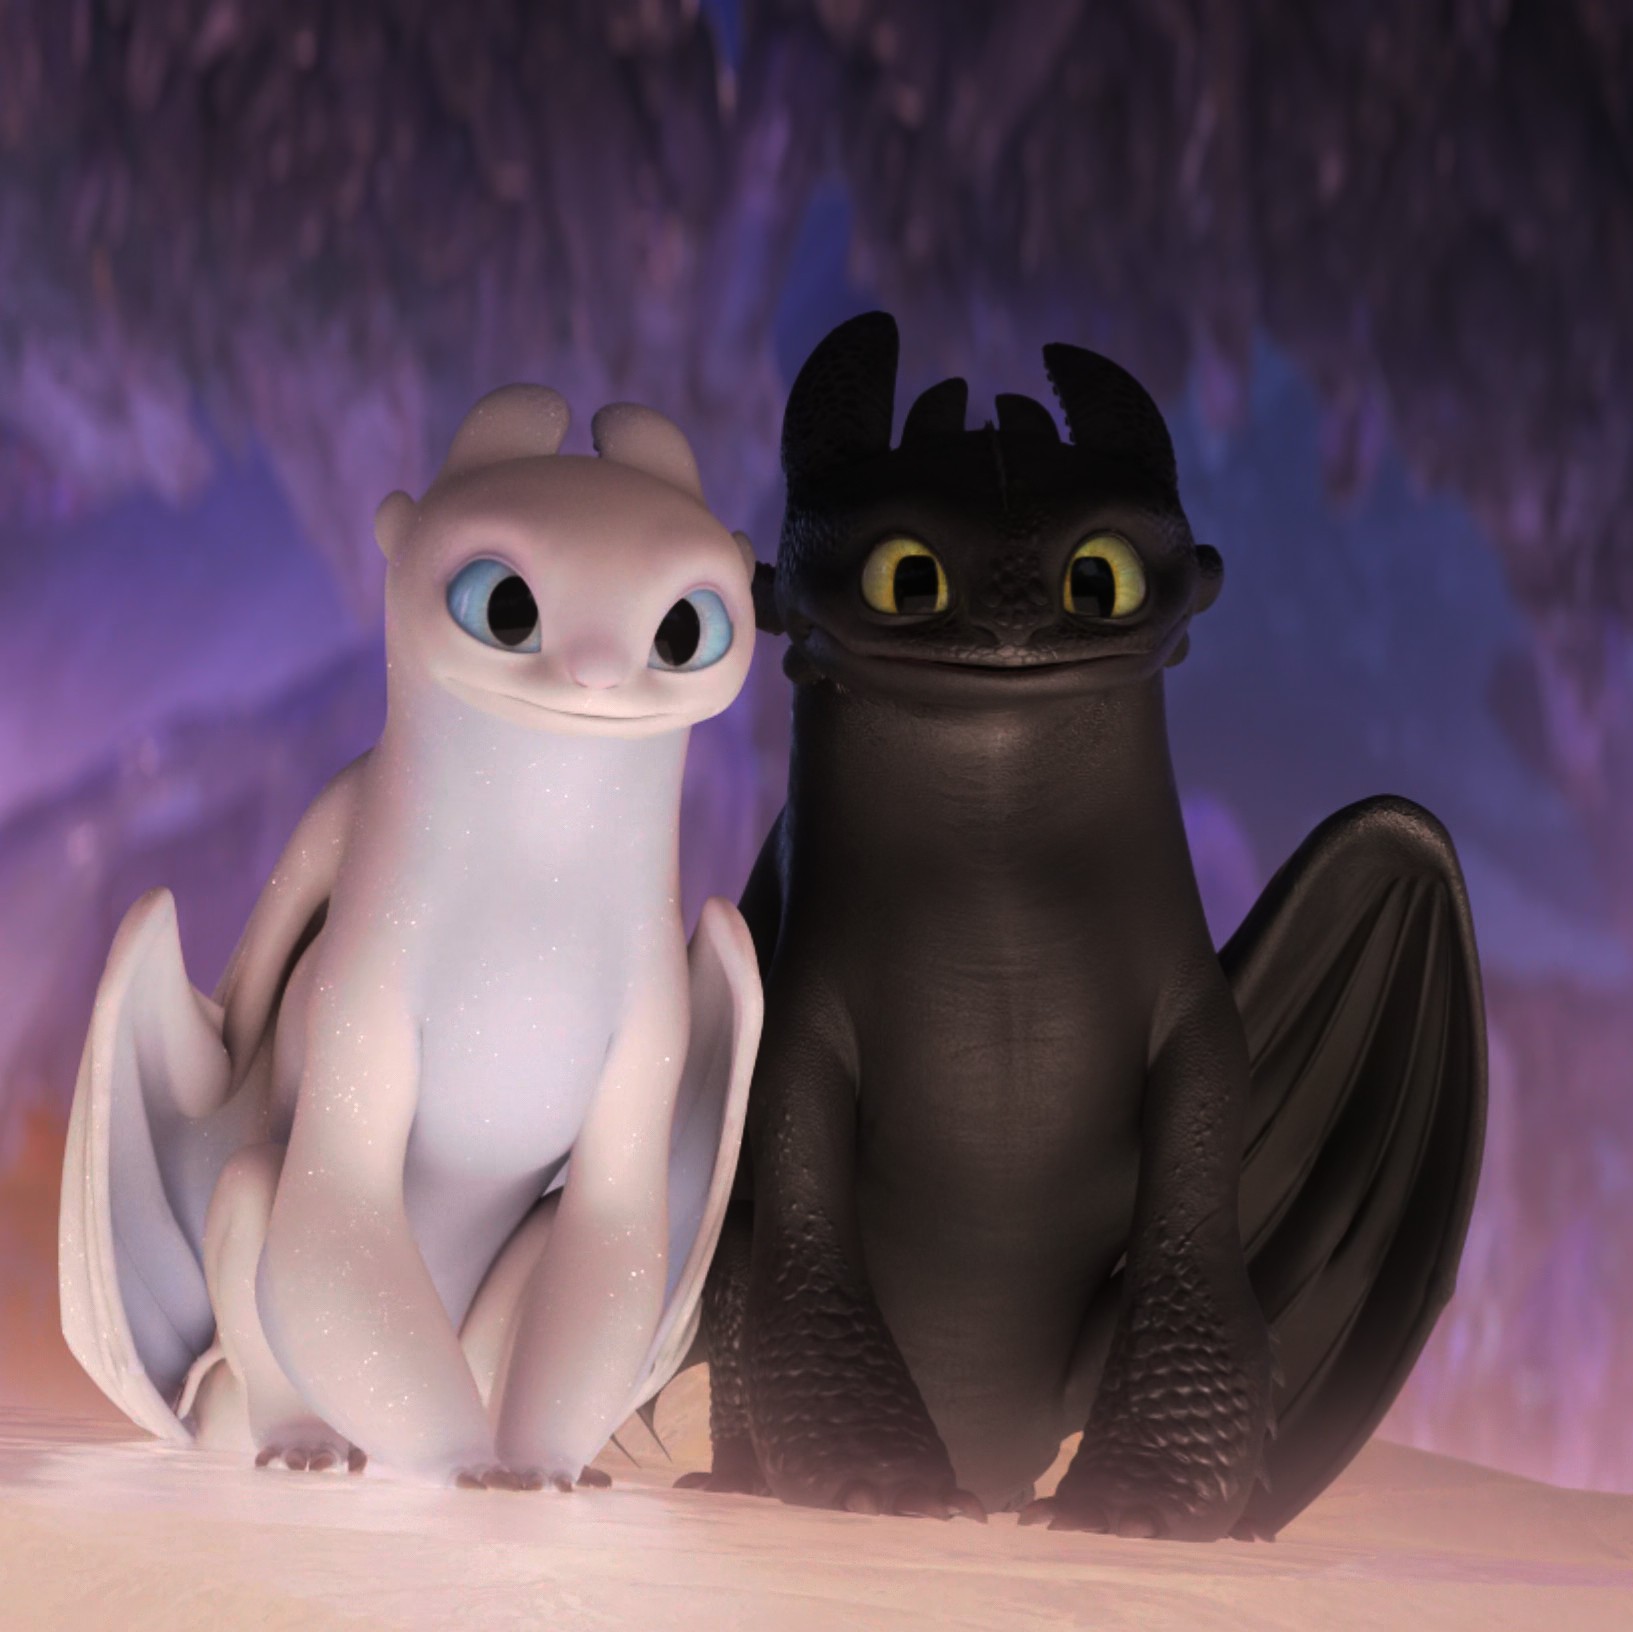 Toothless pic n°65